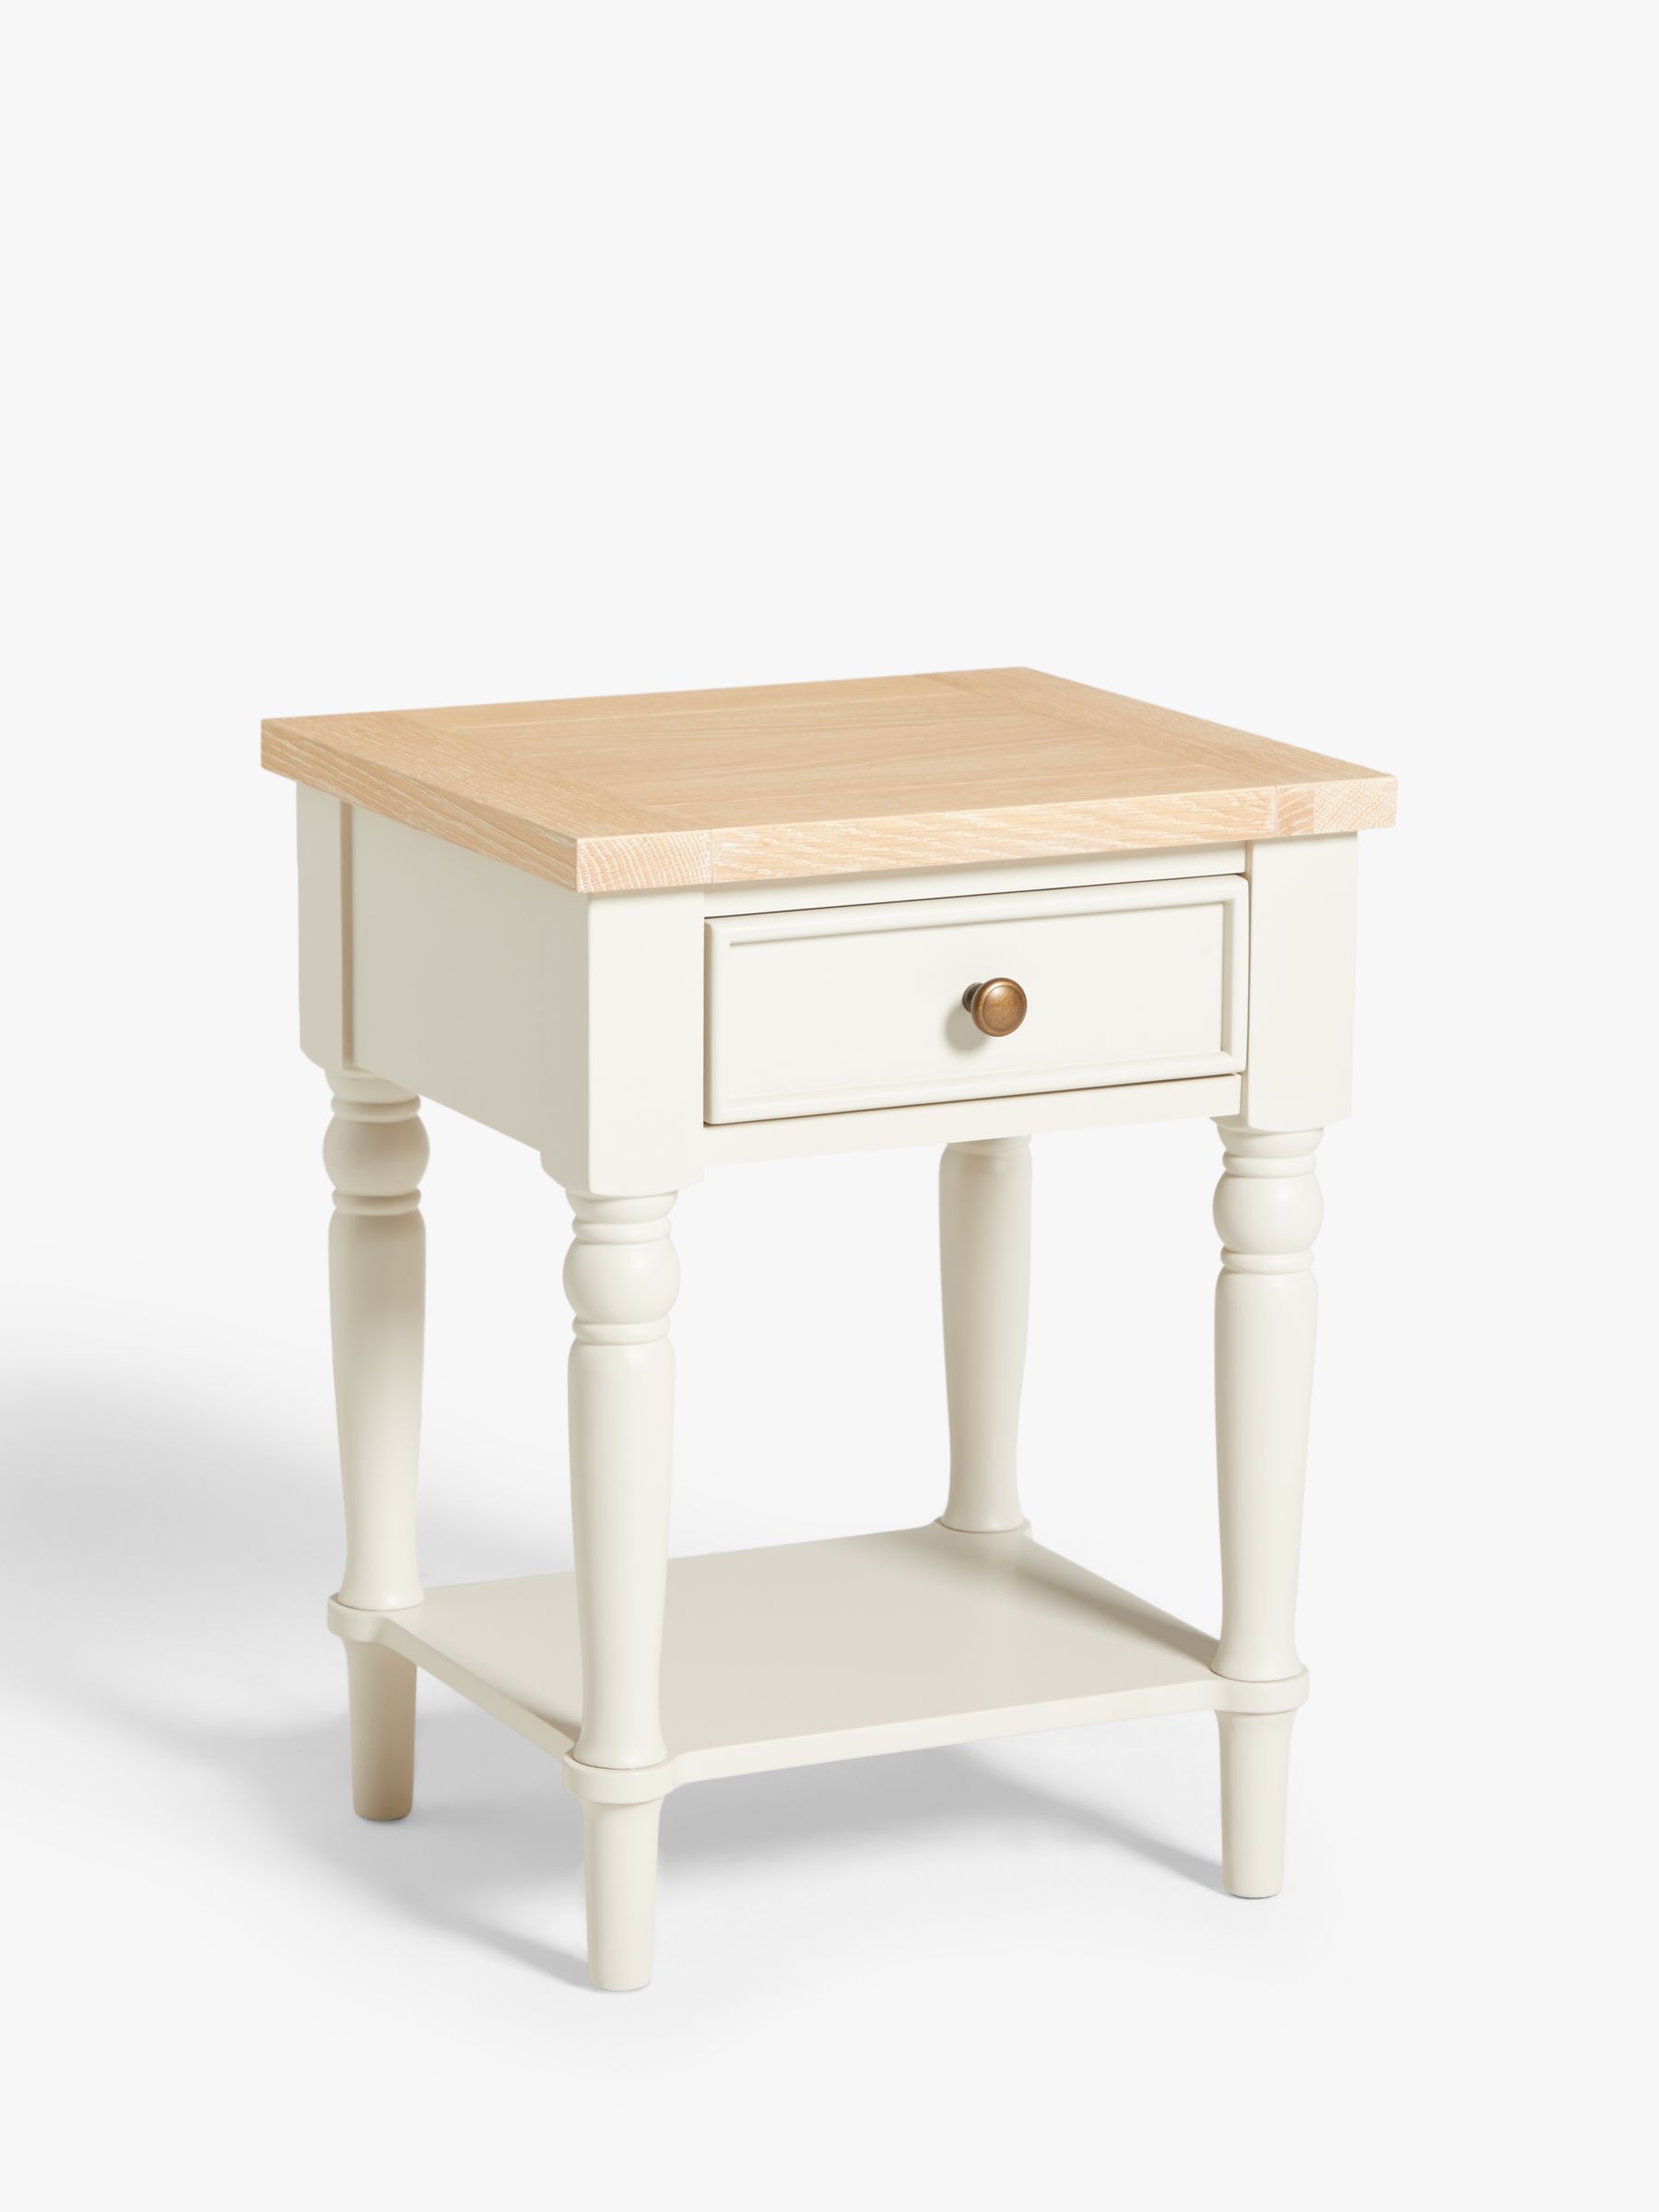 Photo of John lewis foxmoor storage side table fsc-certified -acacia wood- sage green